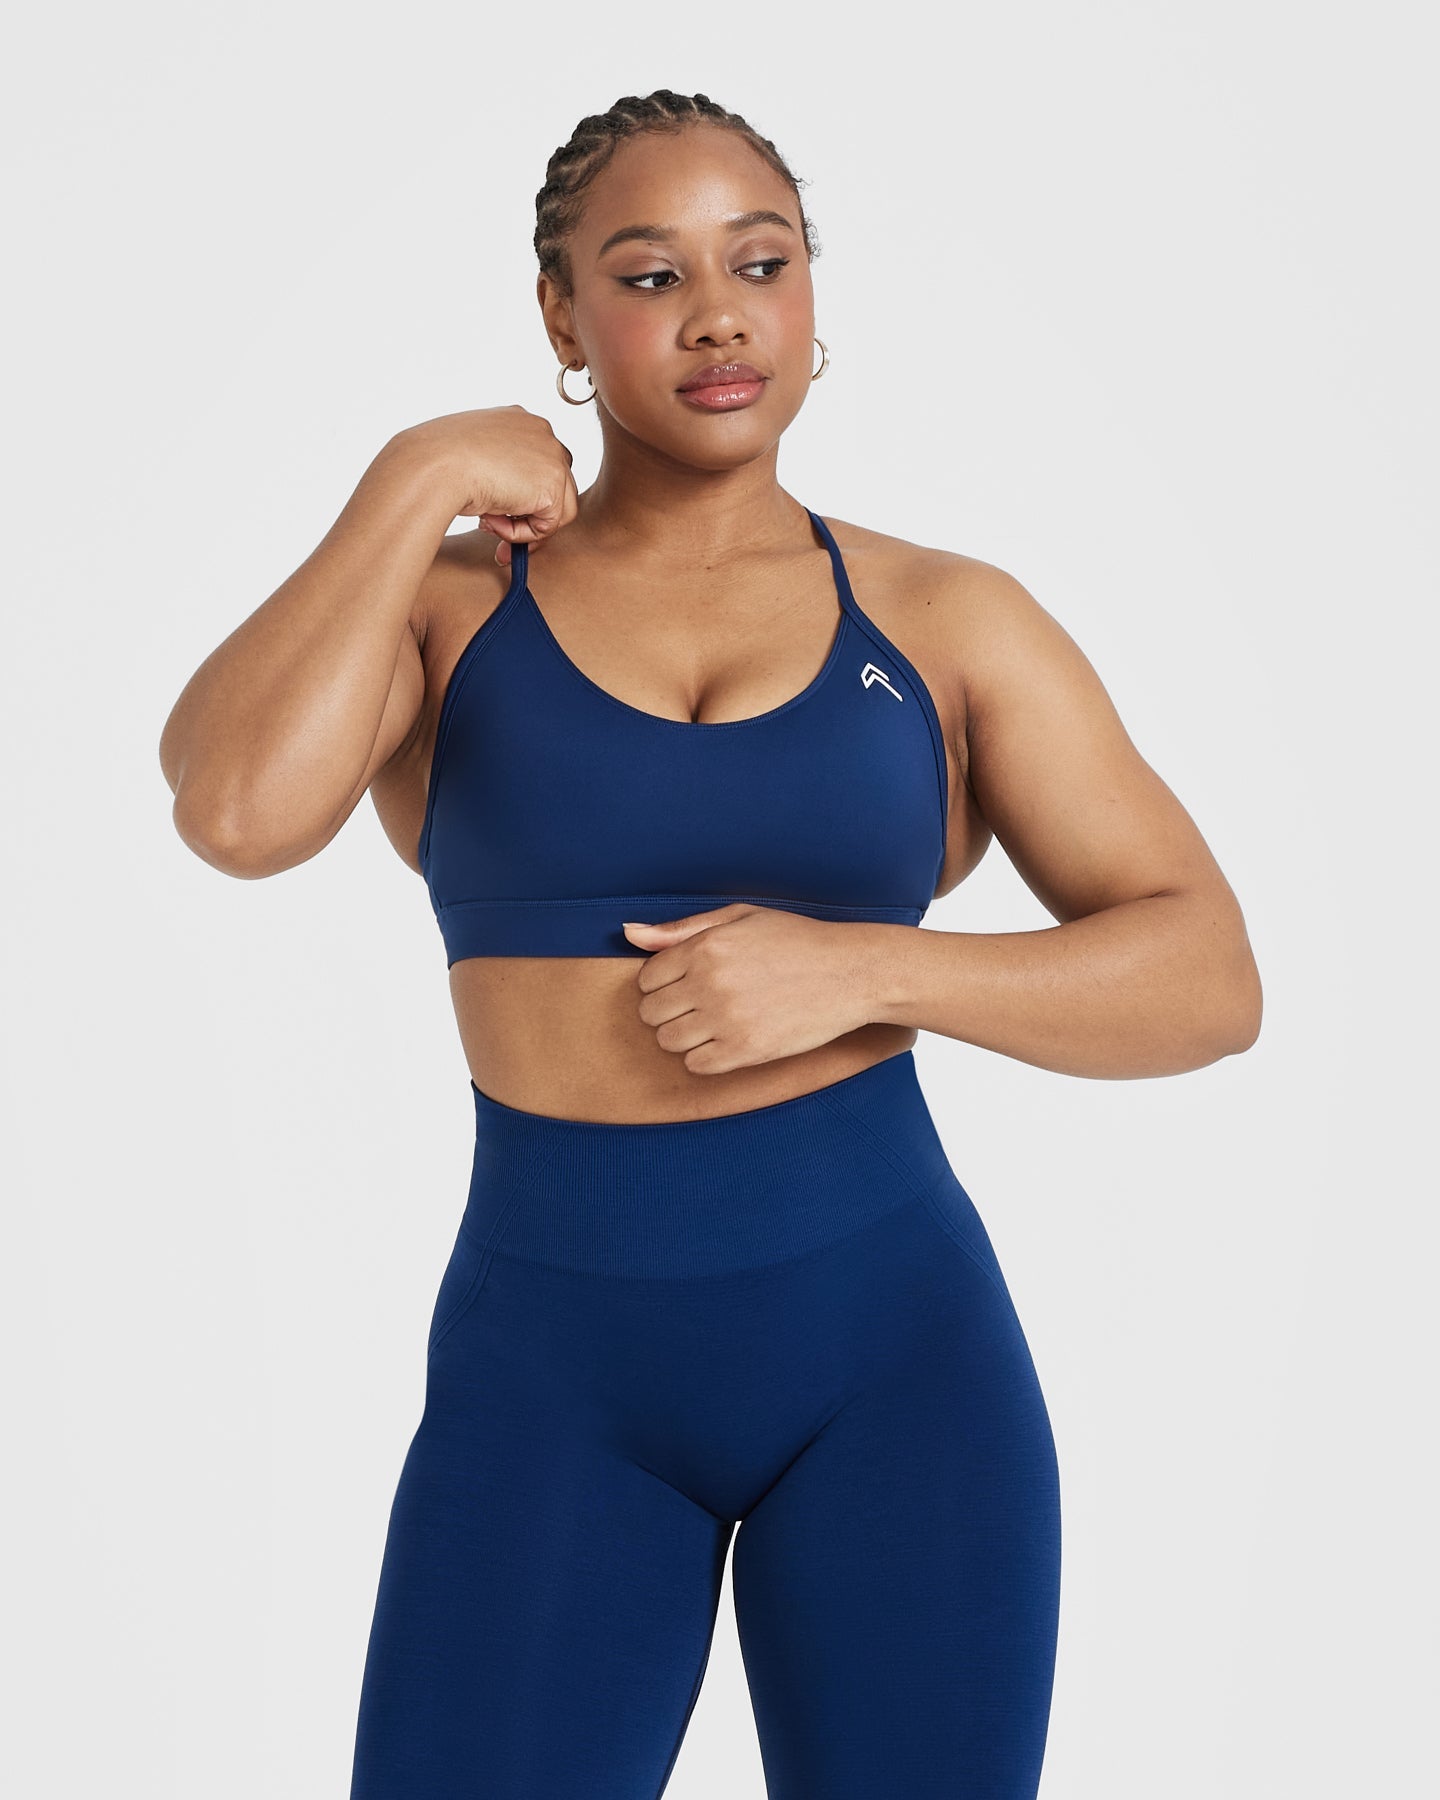 Shop Everyday Sports Bras - The Move